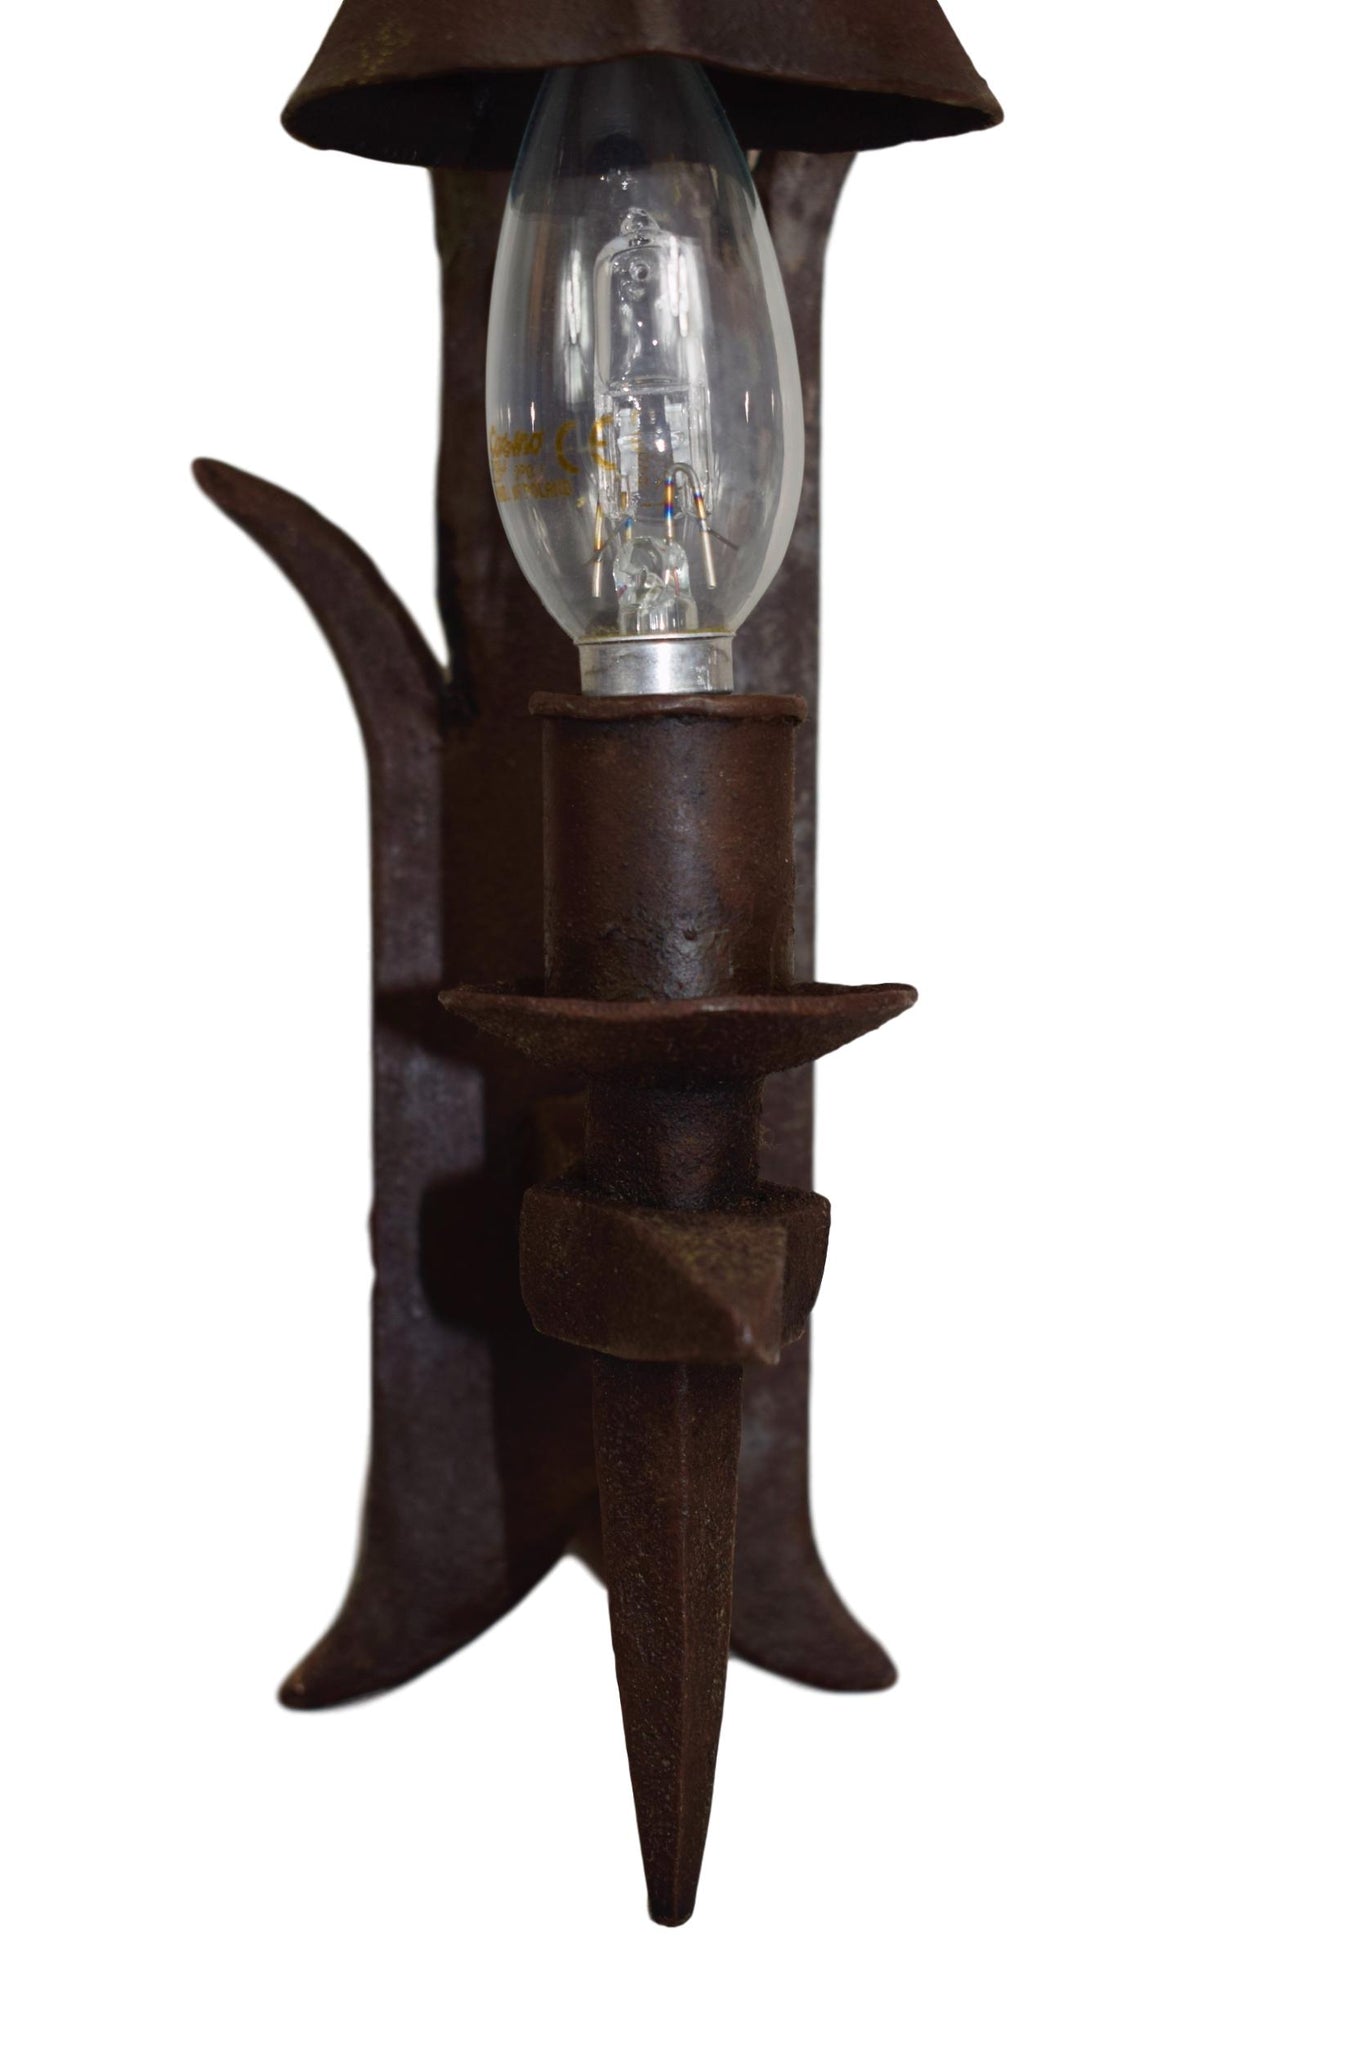 Wrought Iron Wall Sconce - Charmantiques